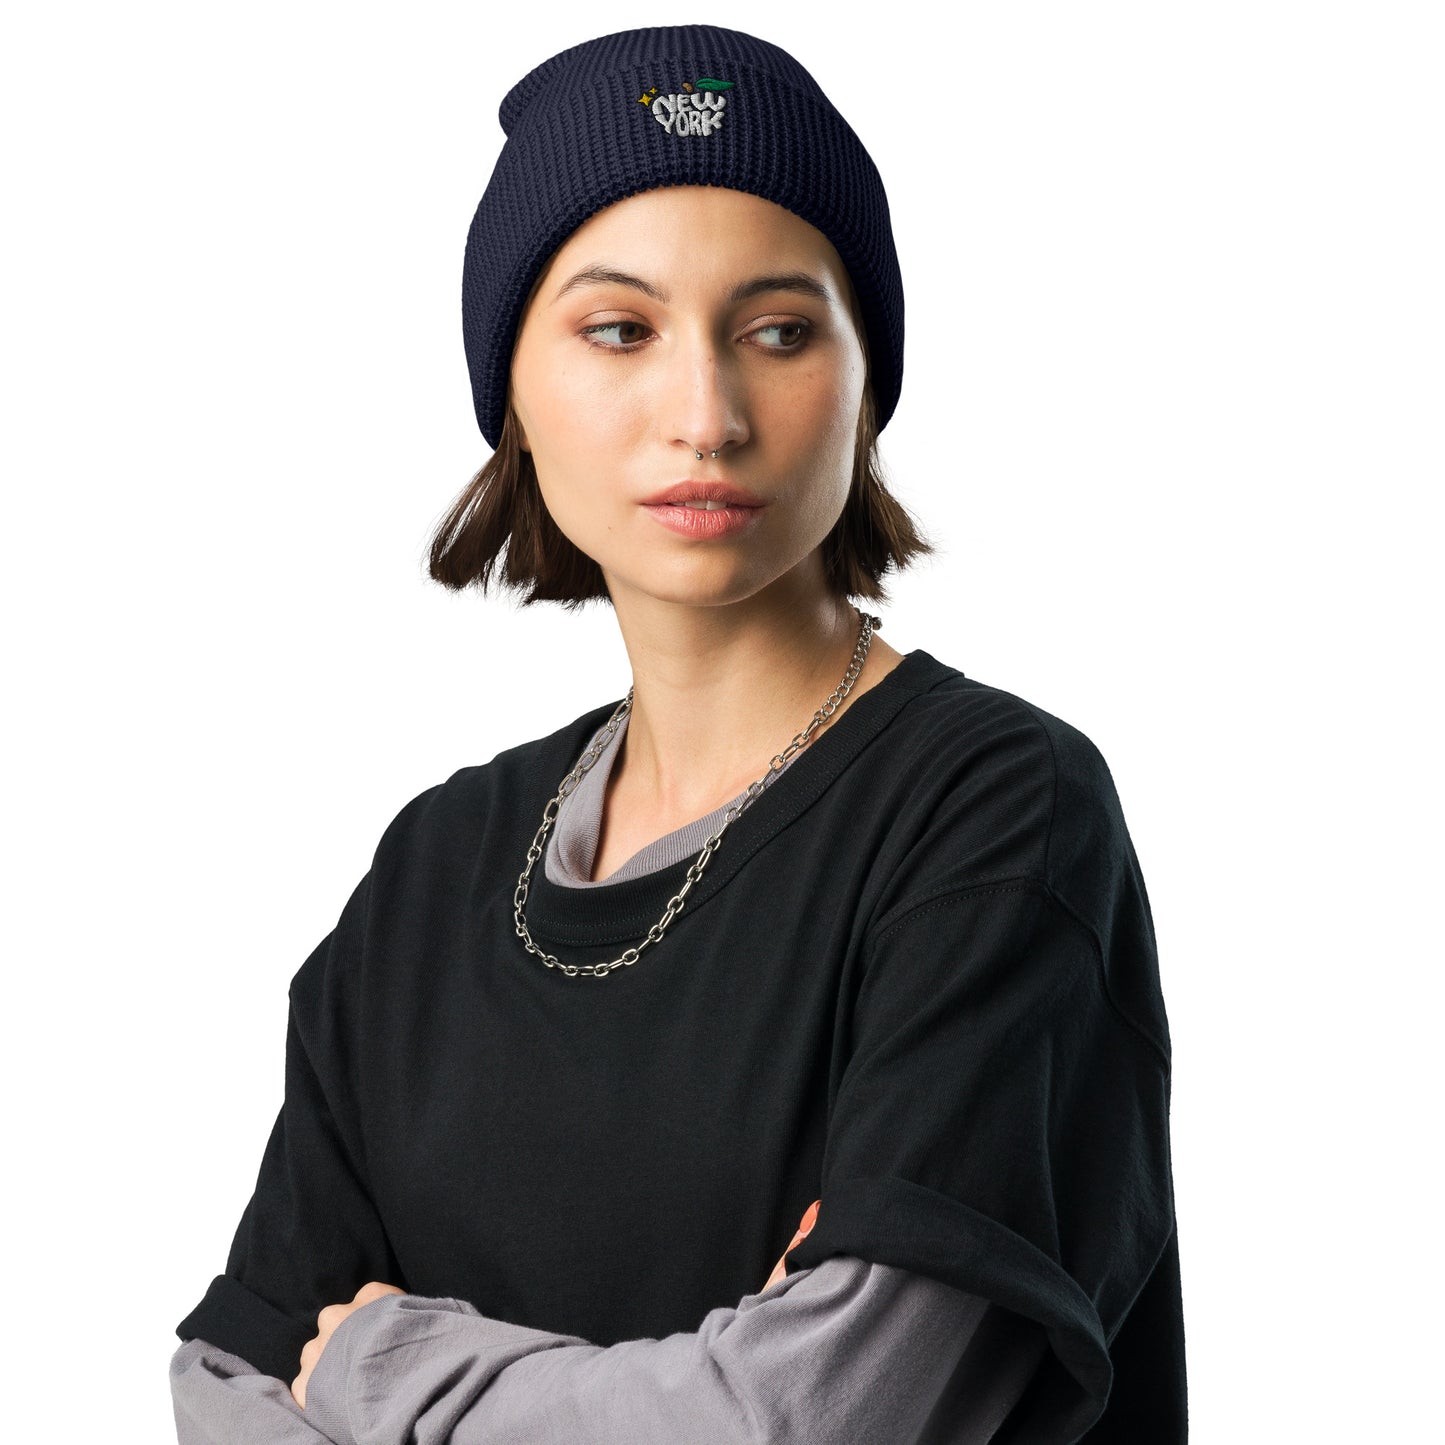 New York Apple Logo Embroidered Navy Blue Waffle Beanie Hat Scattered Streetwear